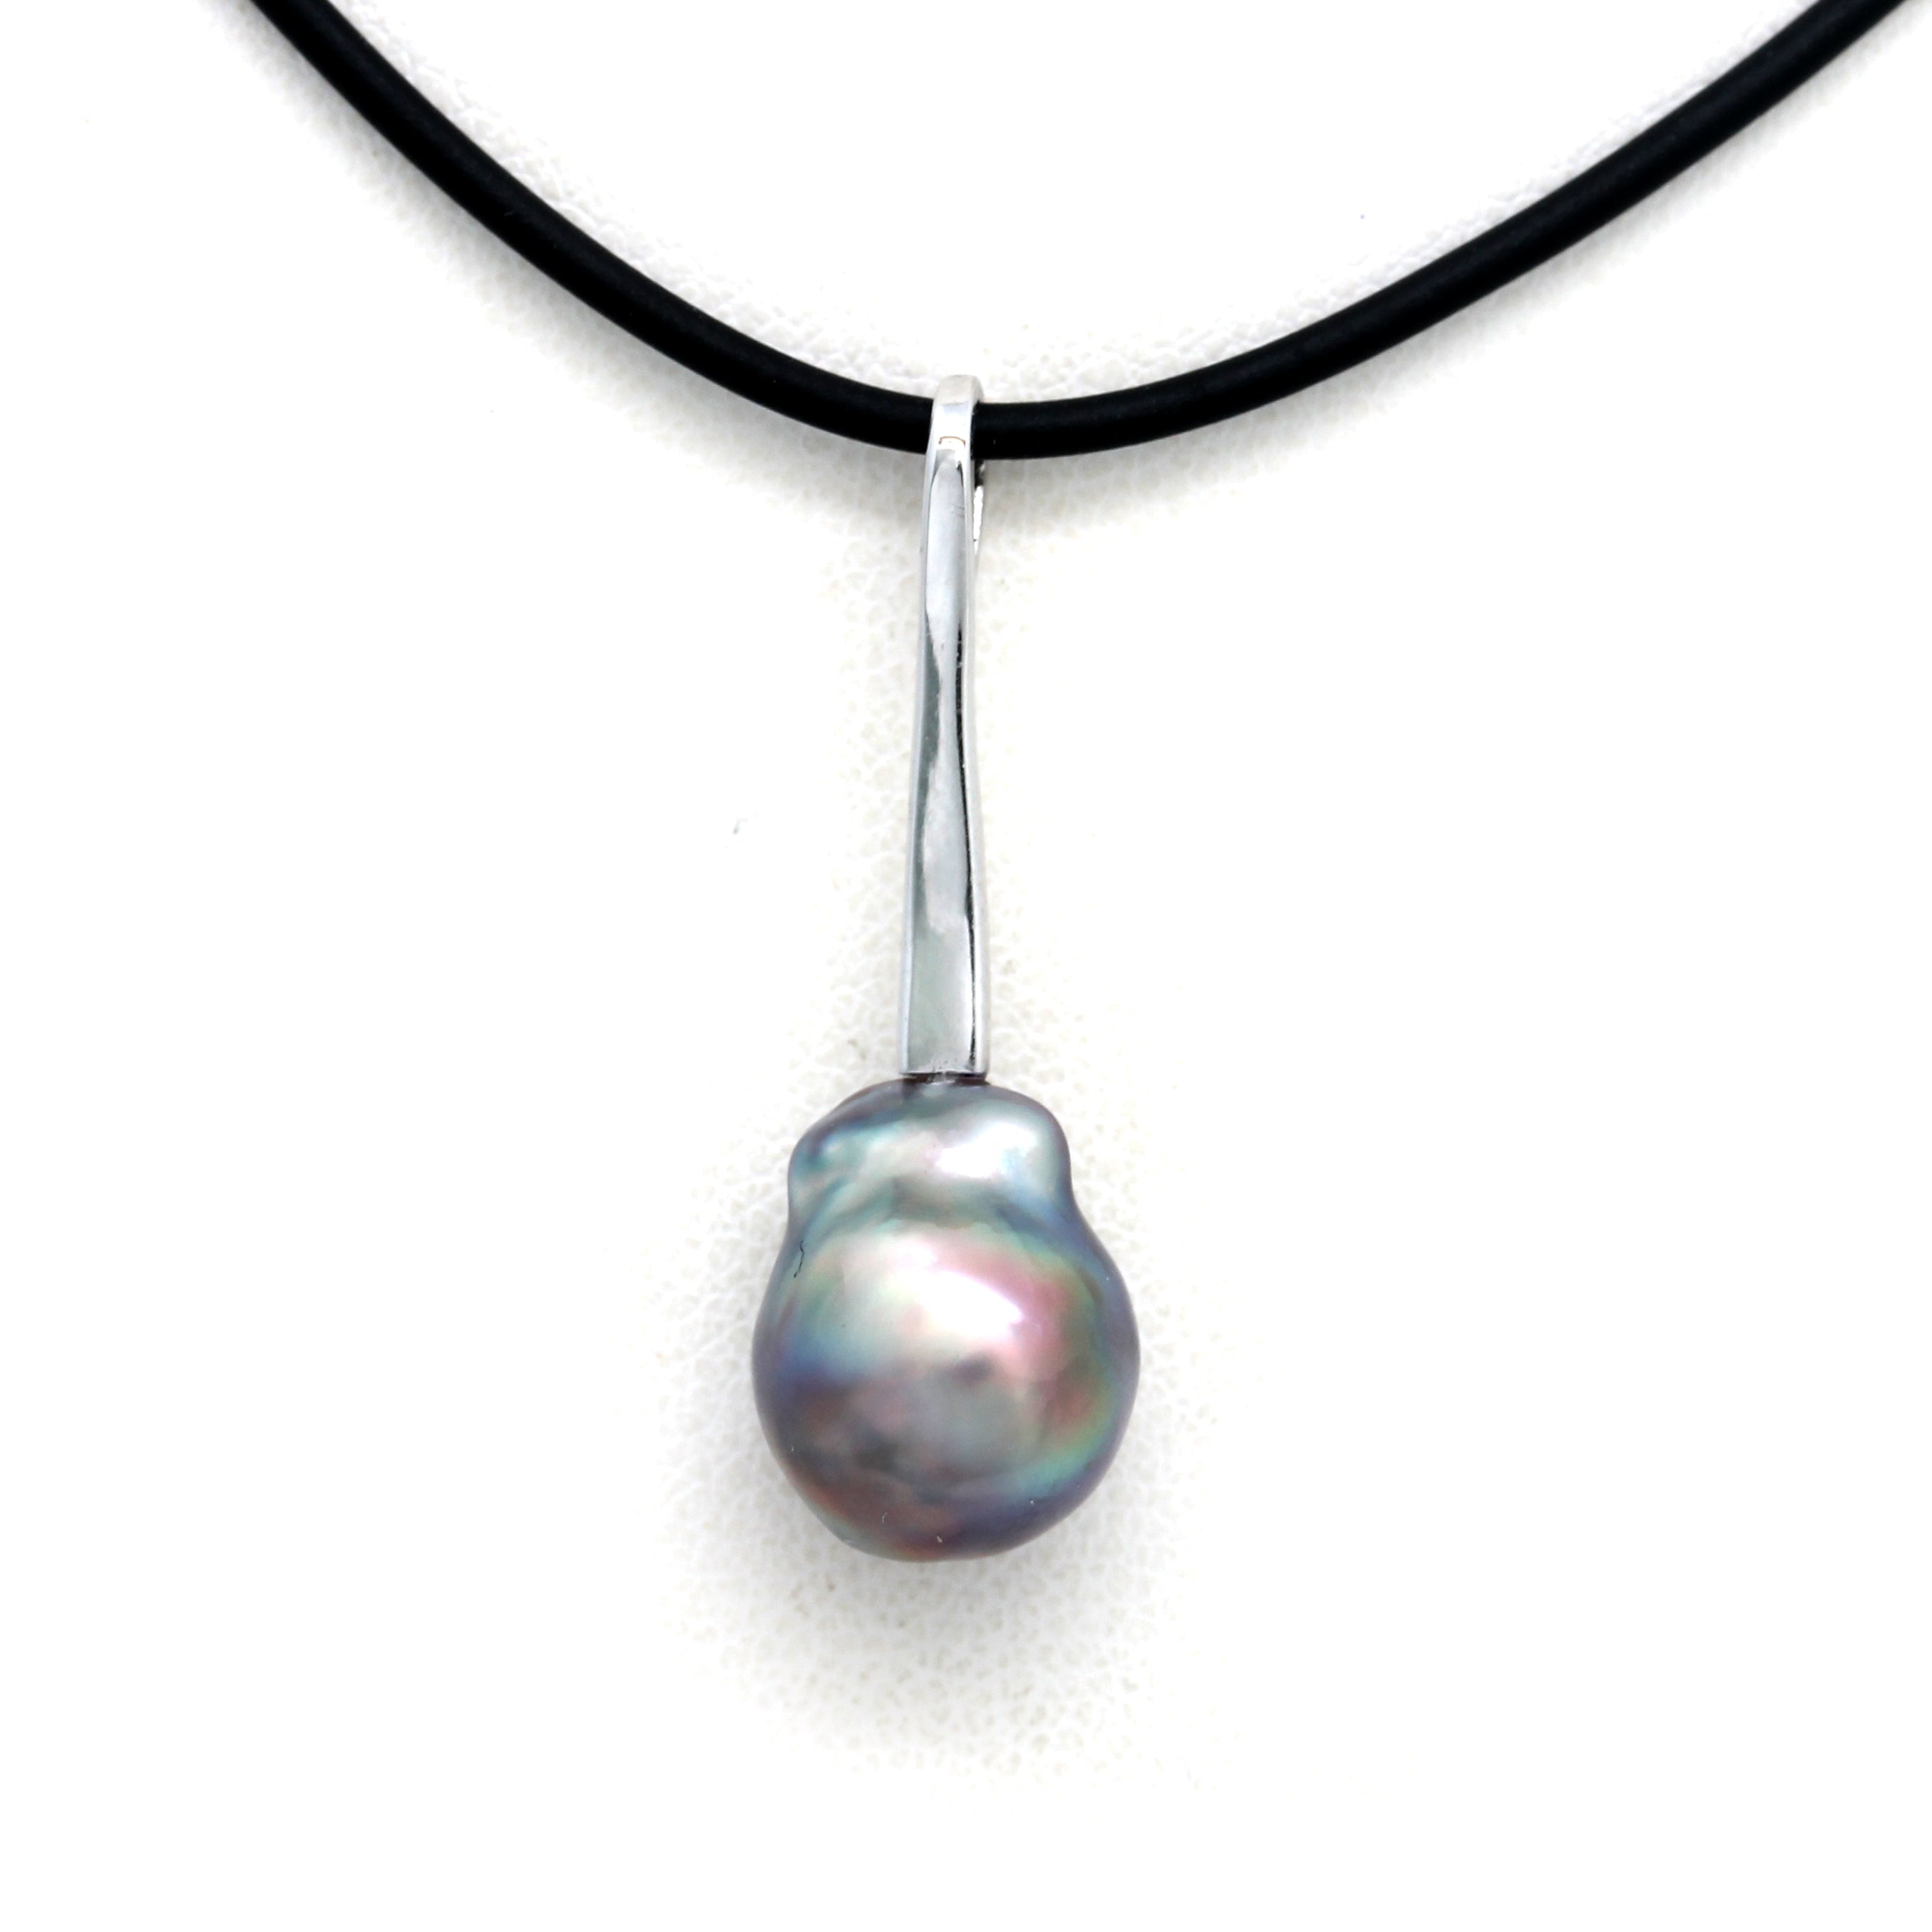 "Longhi" 14K White Gold Pendant with Cortez Pearl